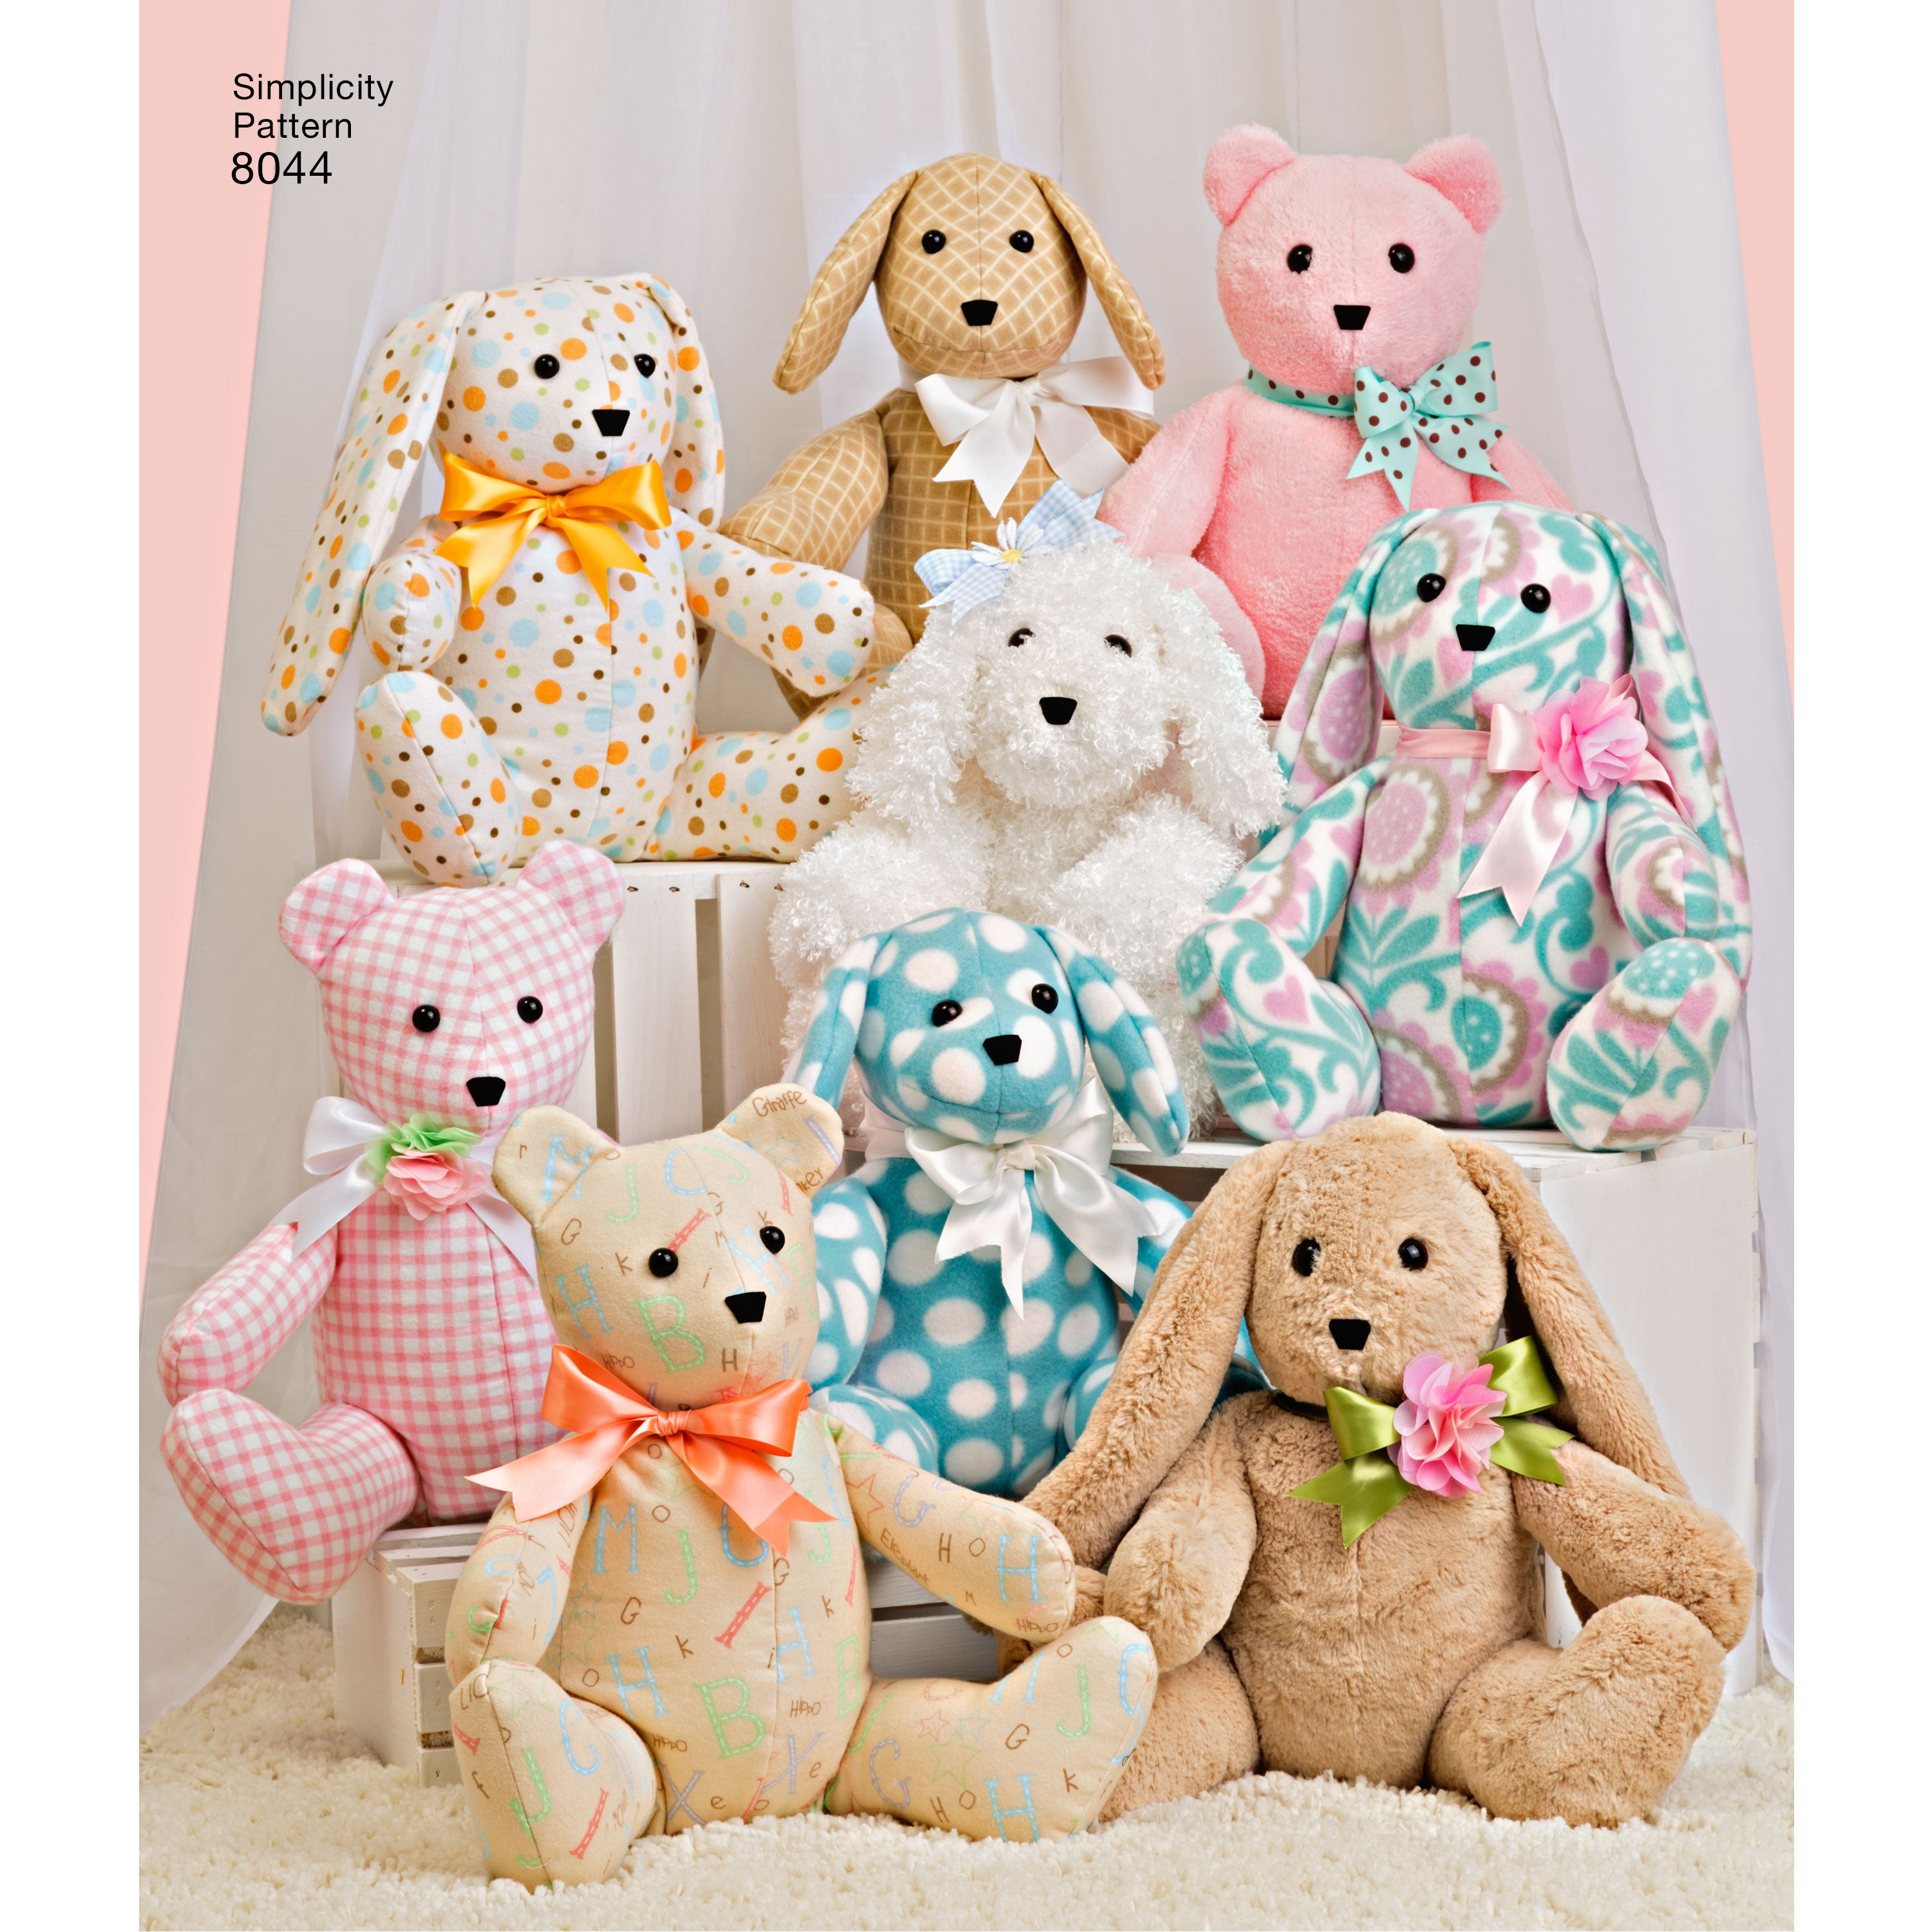 Simplicity Pattern 8044  cozy stuffed animals from Jaycotts Sewing Supplies